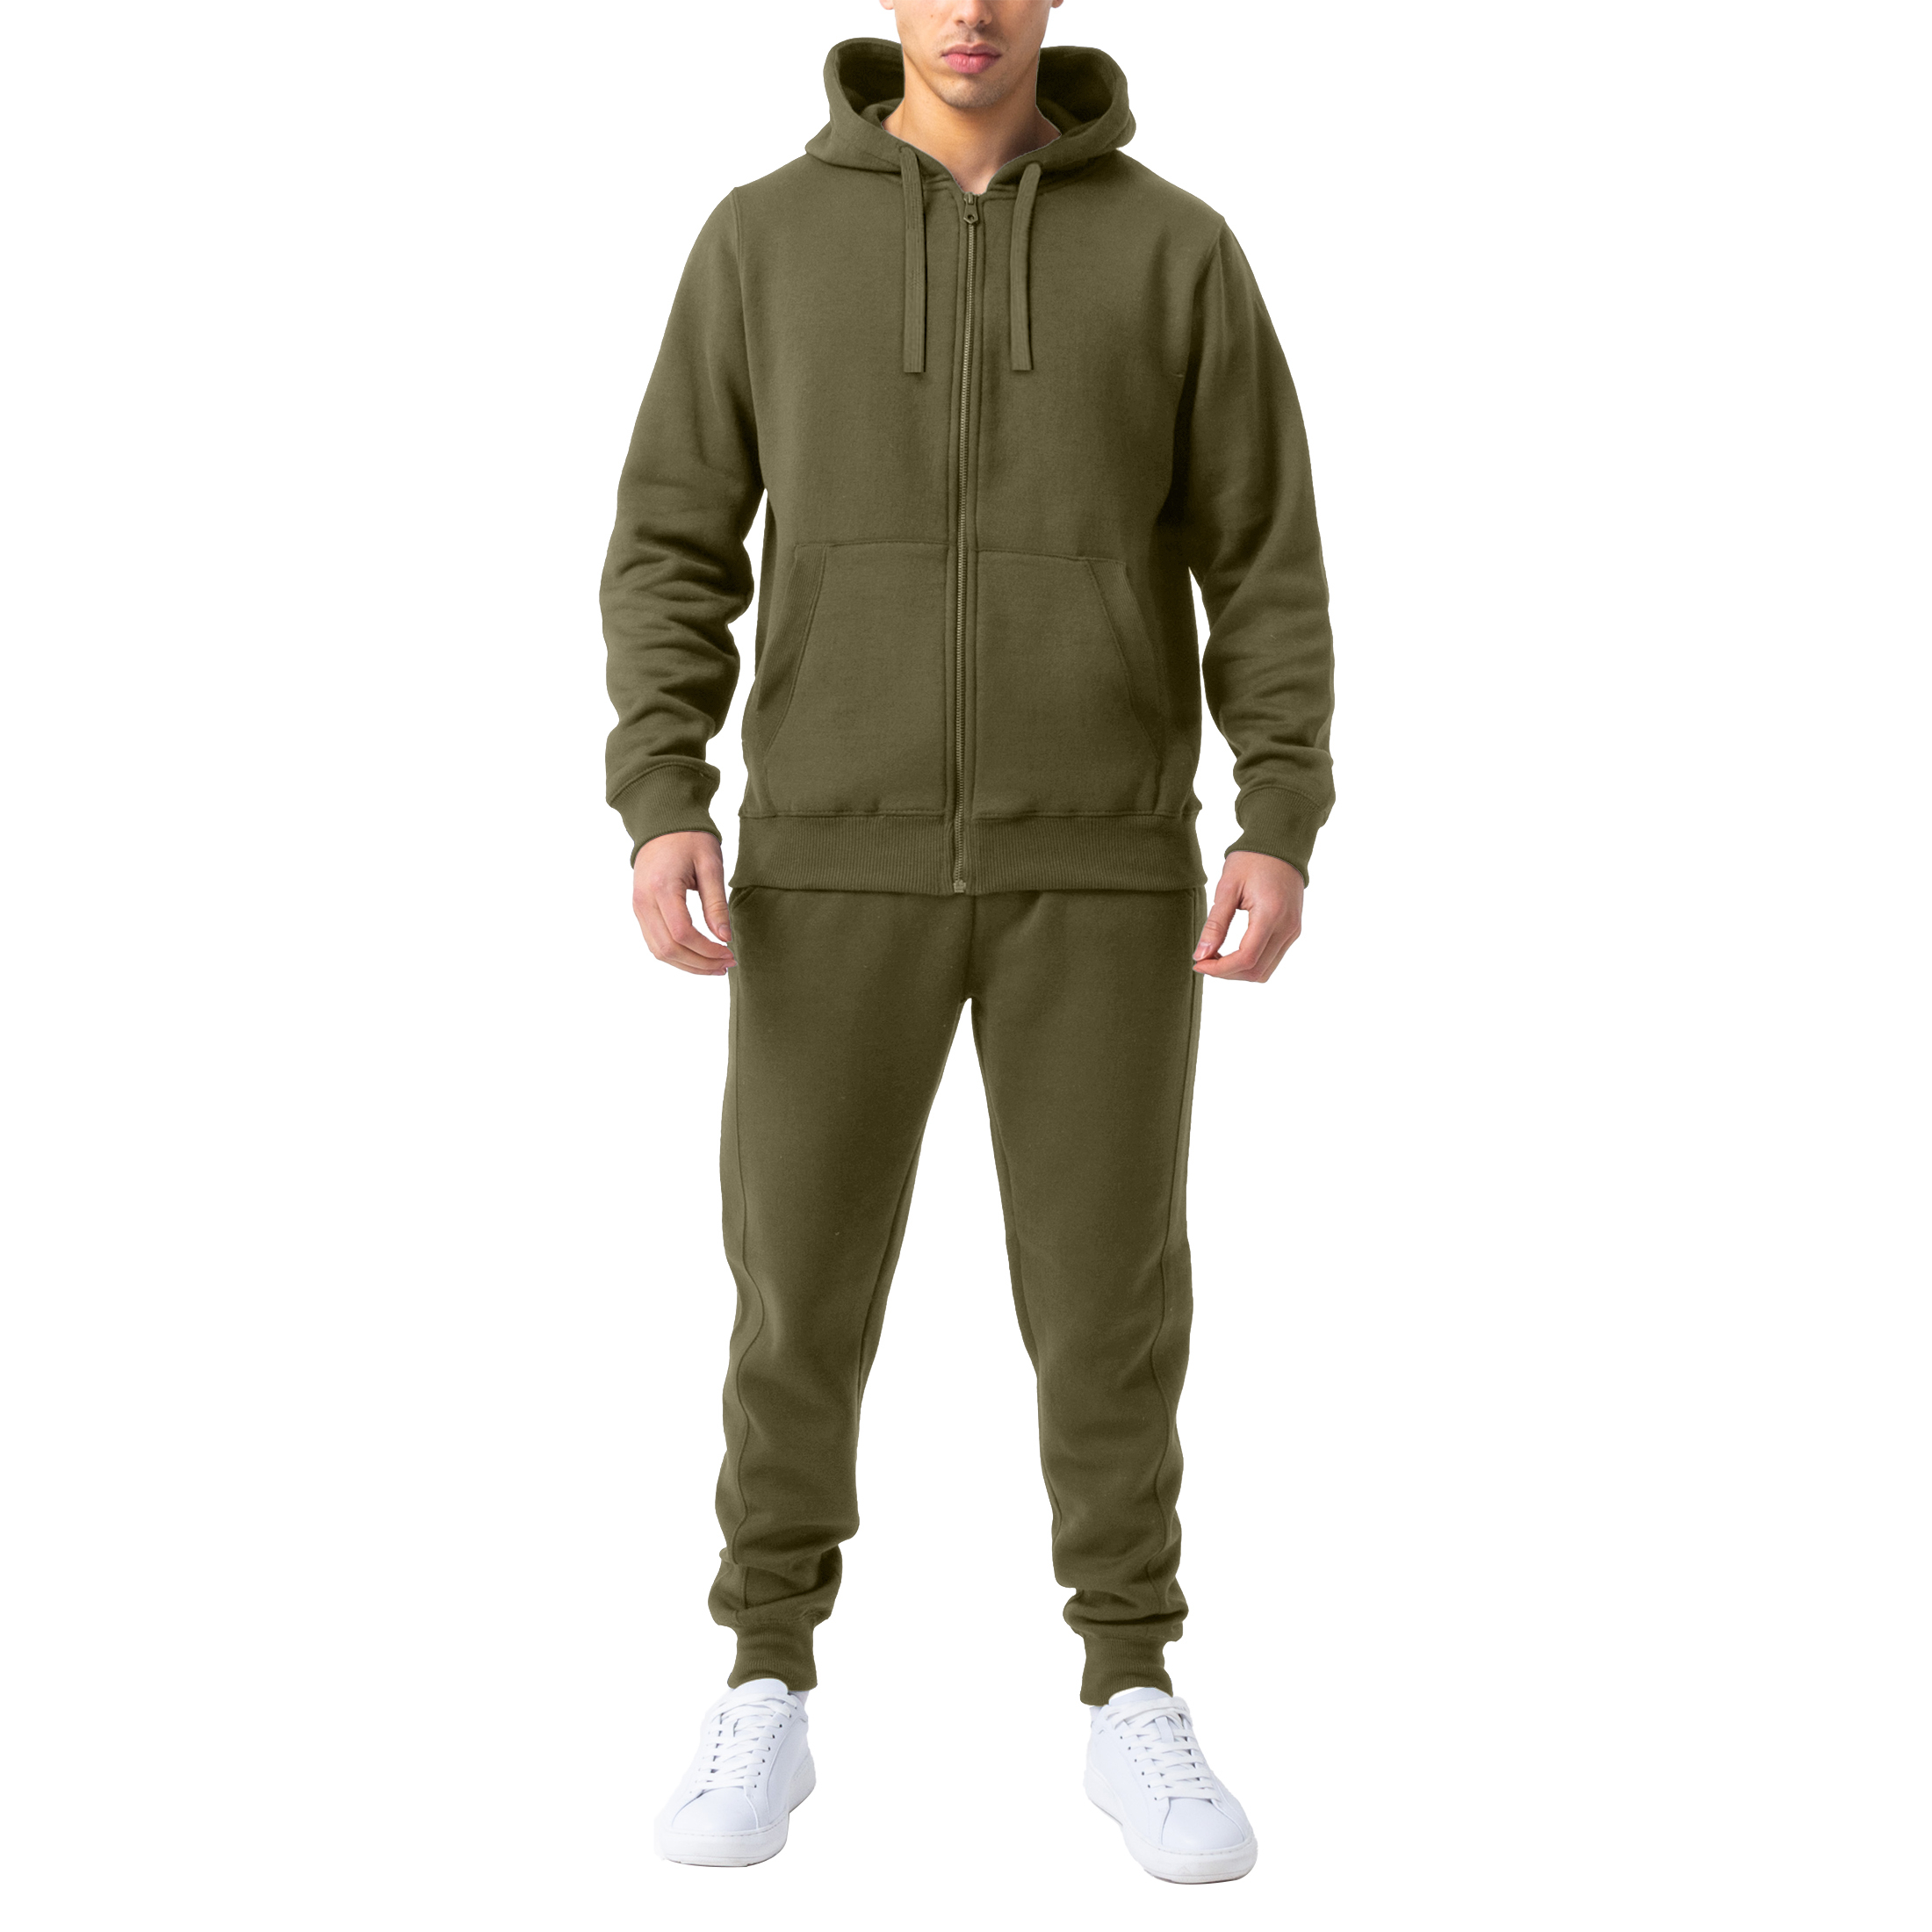 Men's Casual Jogging Athletic Active Full Zip Up Tracksuit - Olive, Large